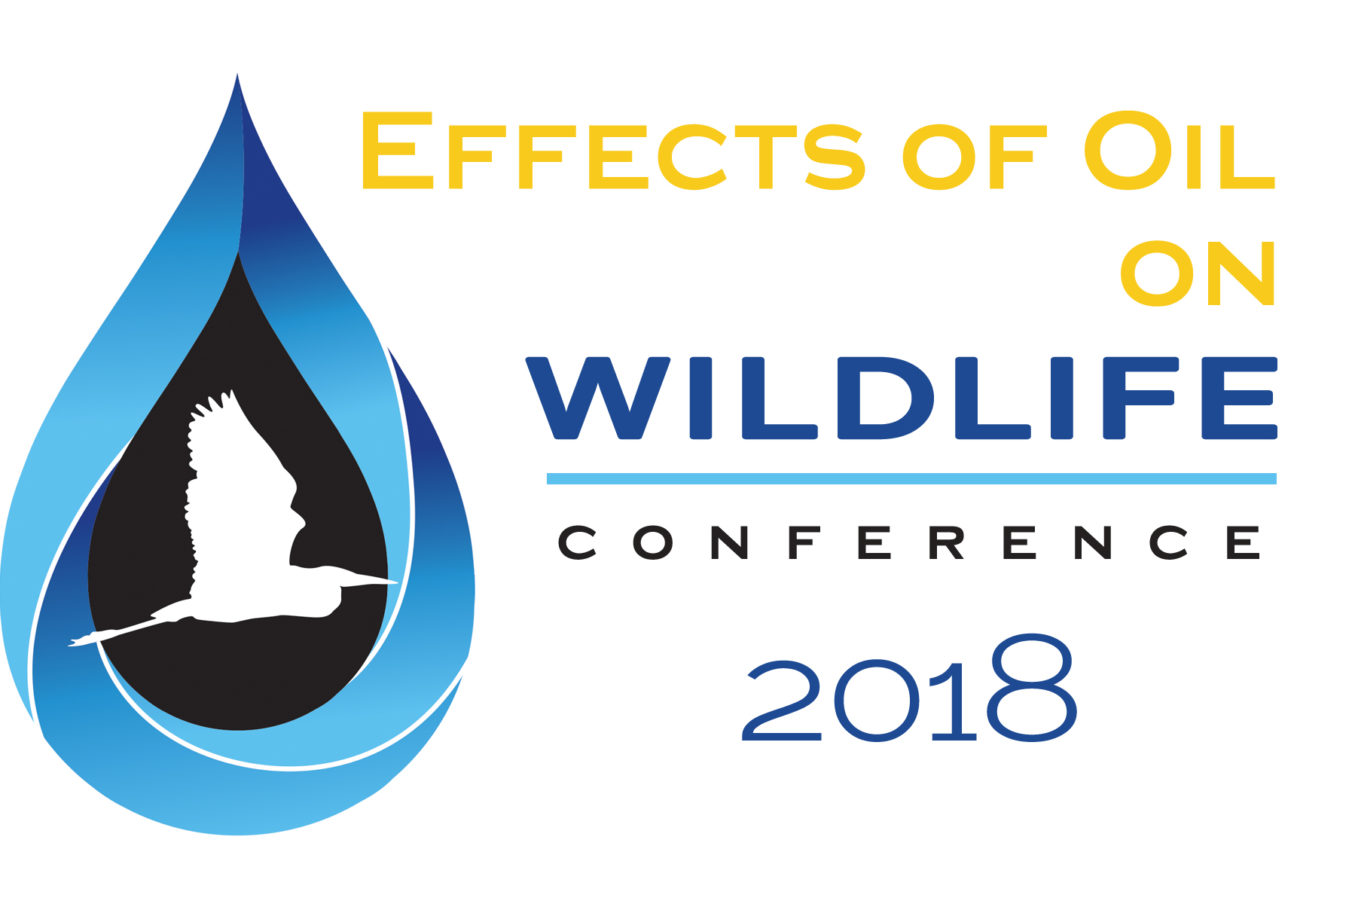 Join Sea Alarm at the Effects of Oil on Wildlife Conference May 5